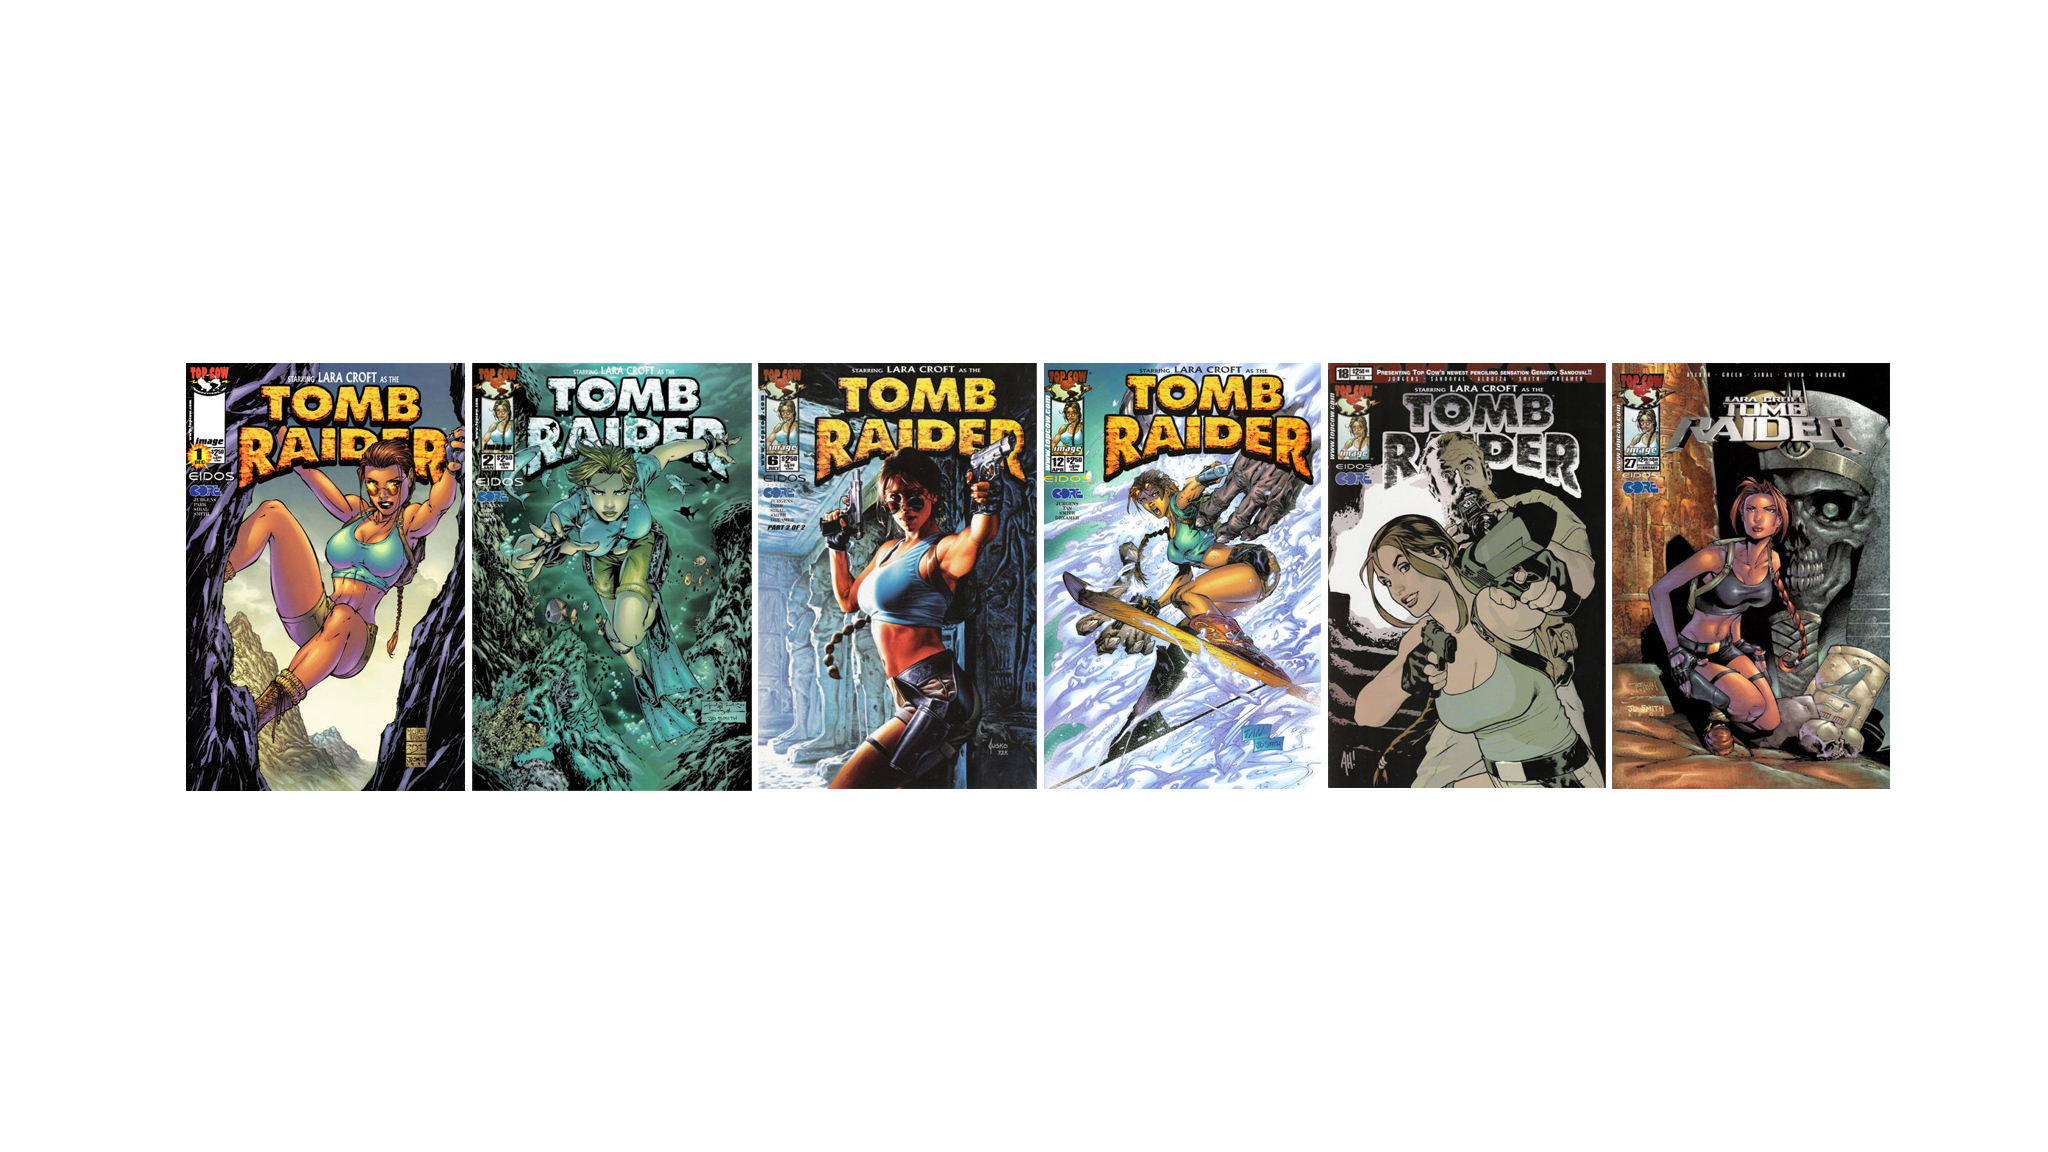 Tomb Raider Comics Top Cow Collage YouTube Banner.jpg